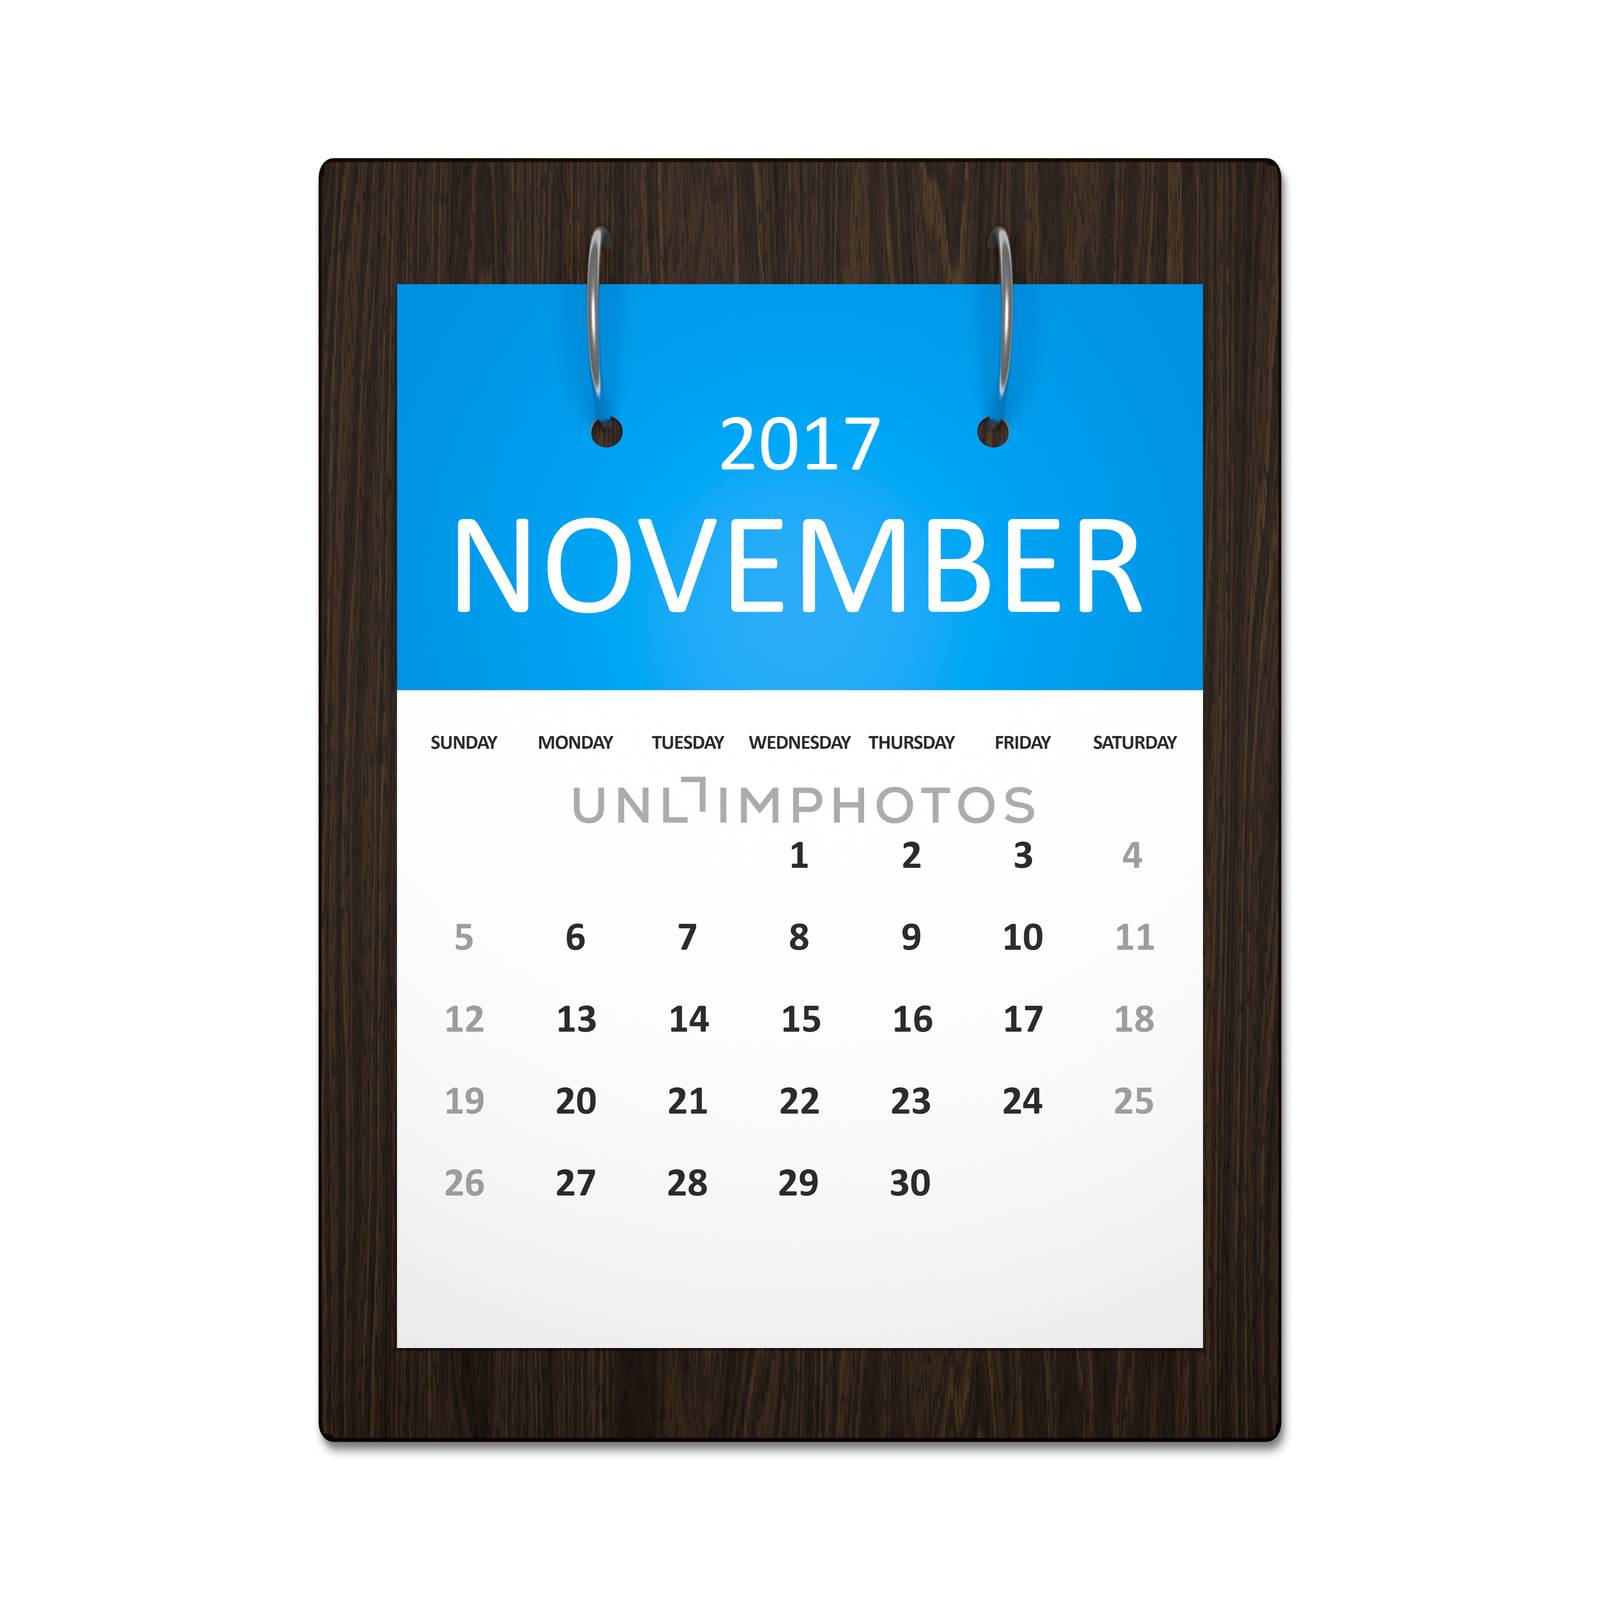 An image of a stylish calendar for event planning 2017 november